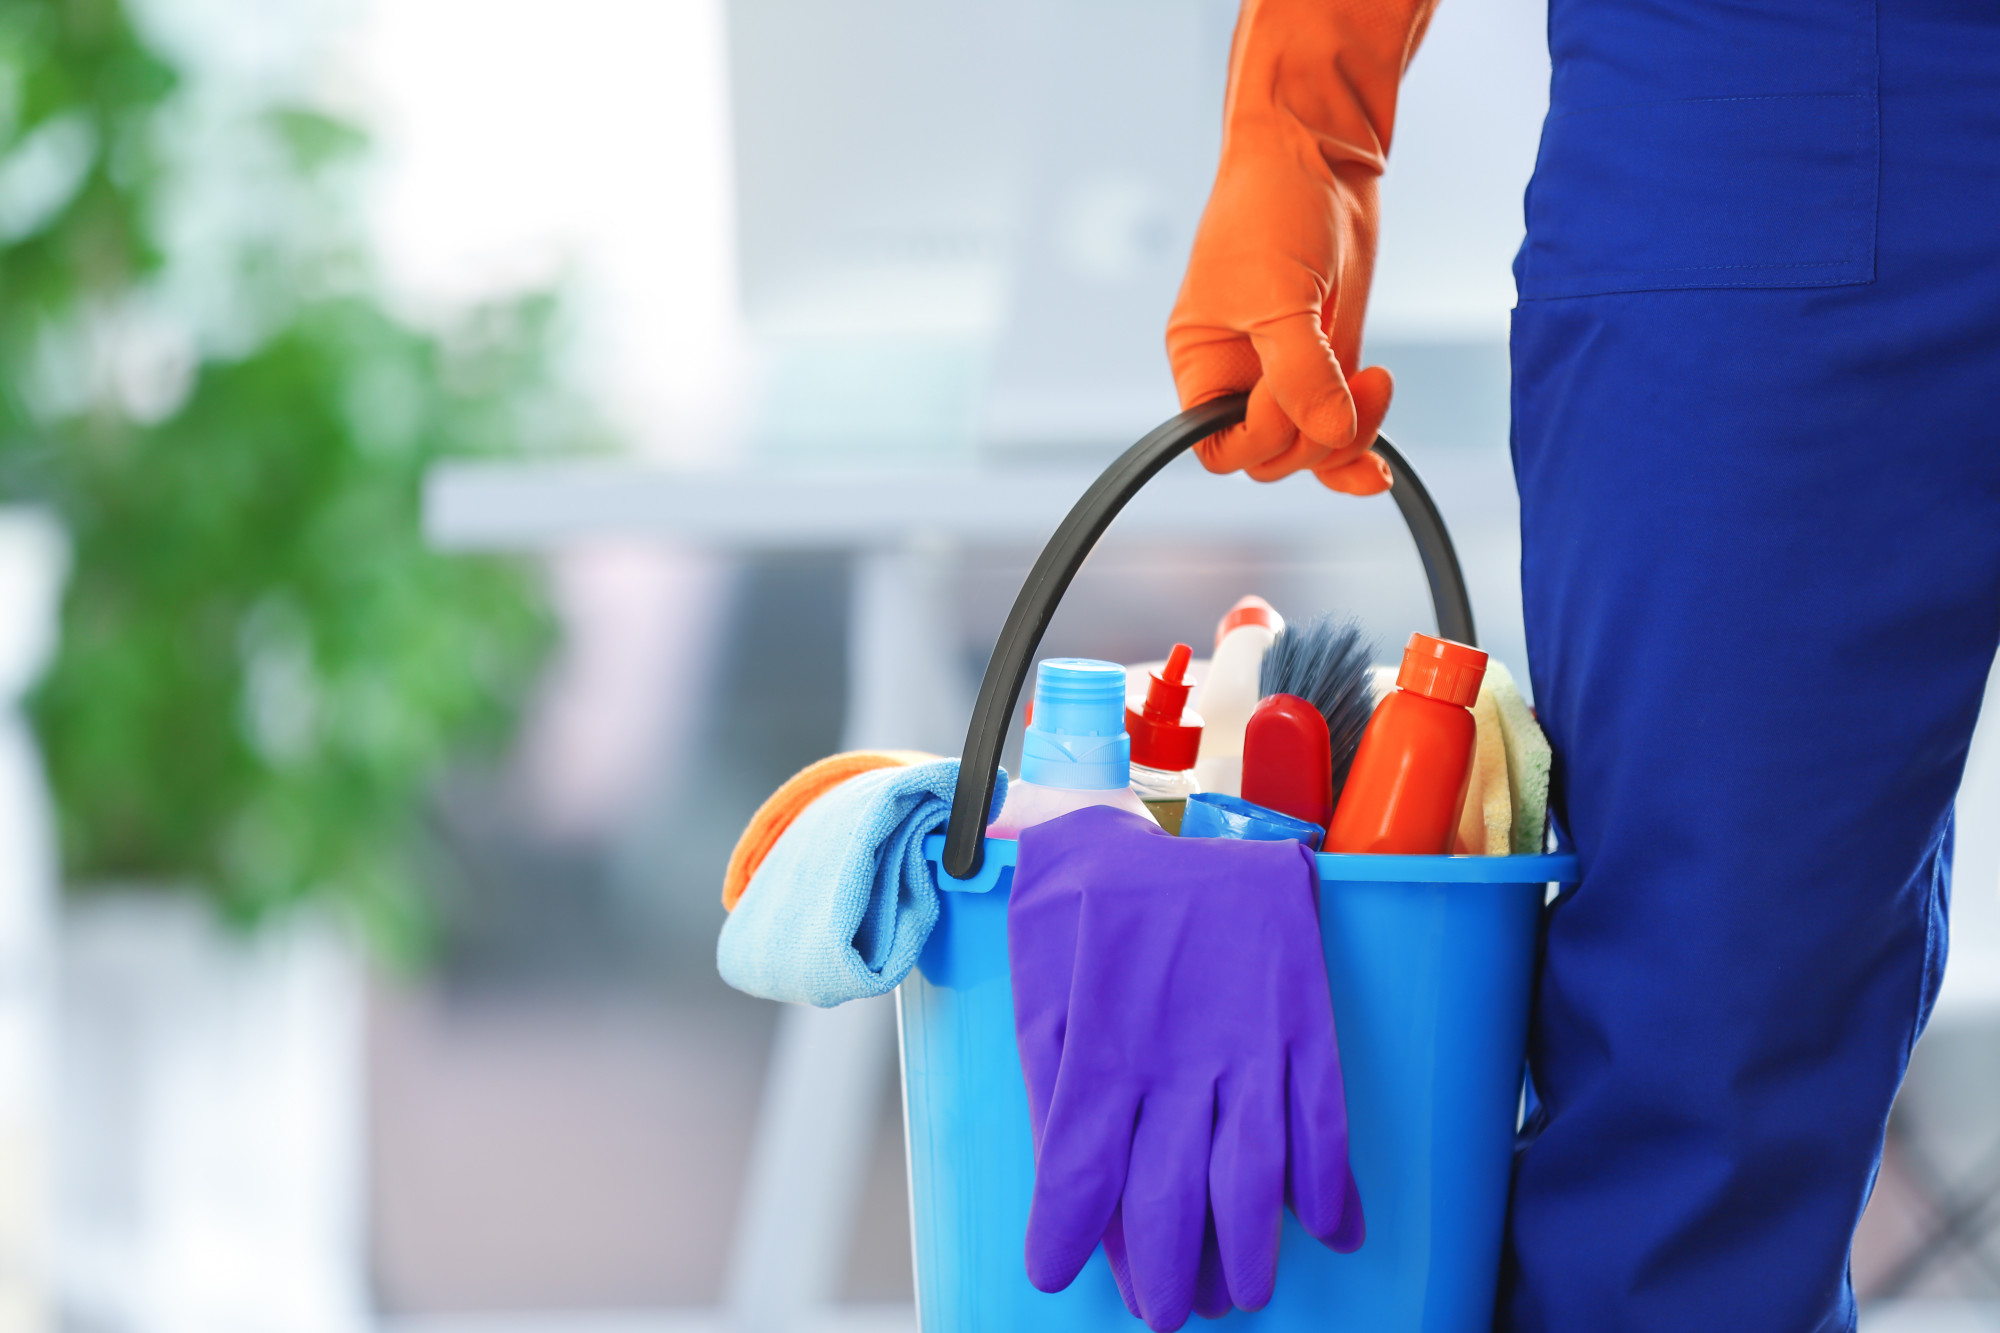 Commercial Cleaning Aurora Colorado